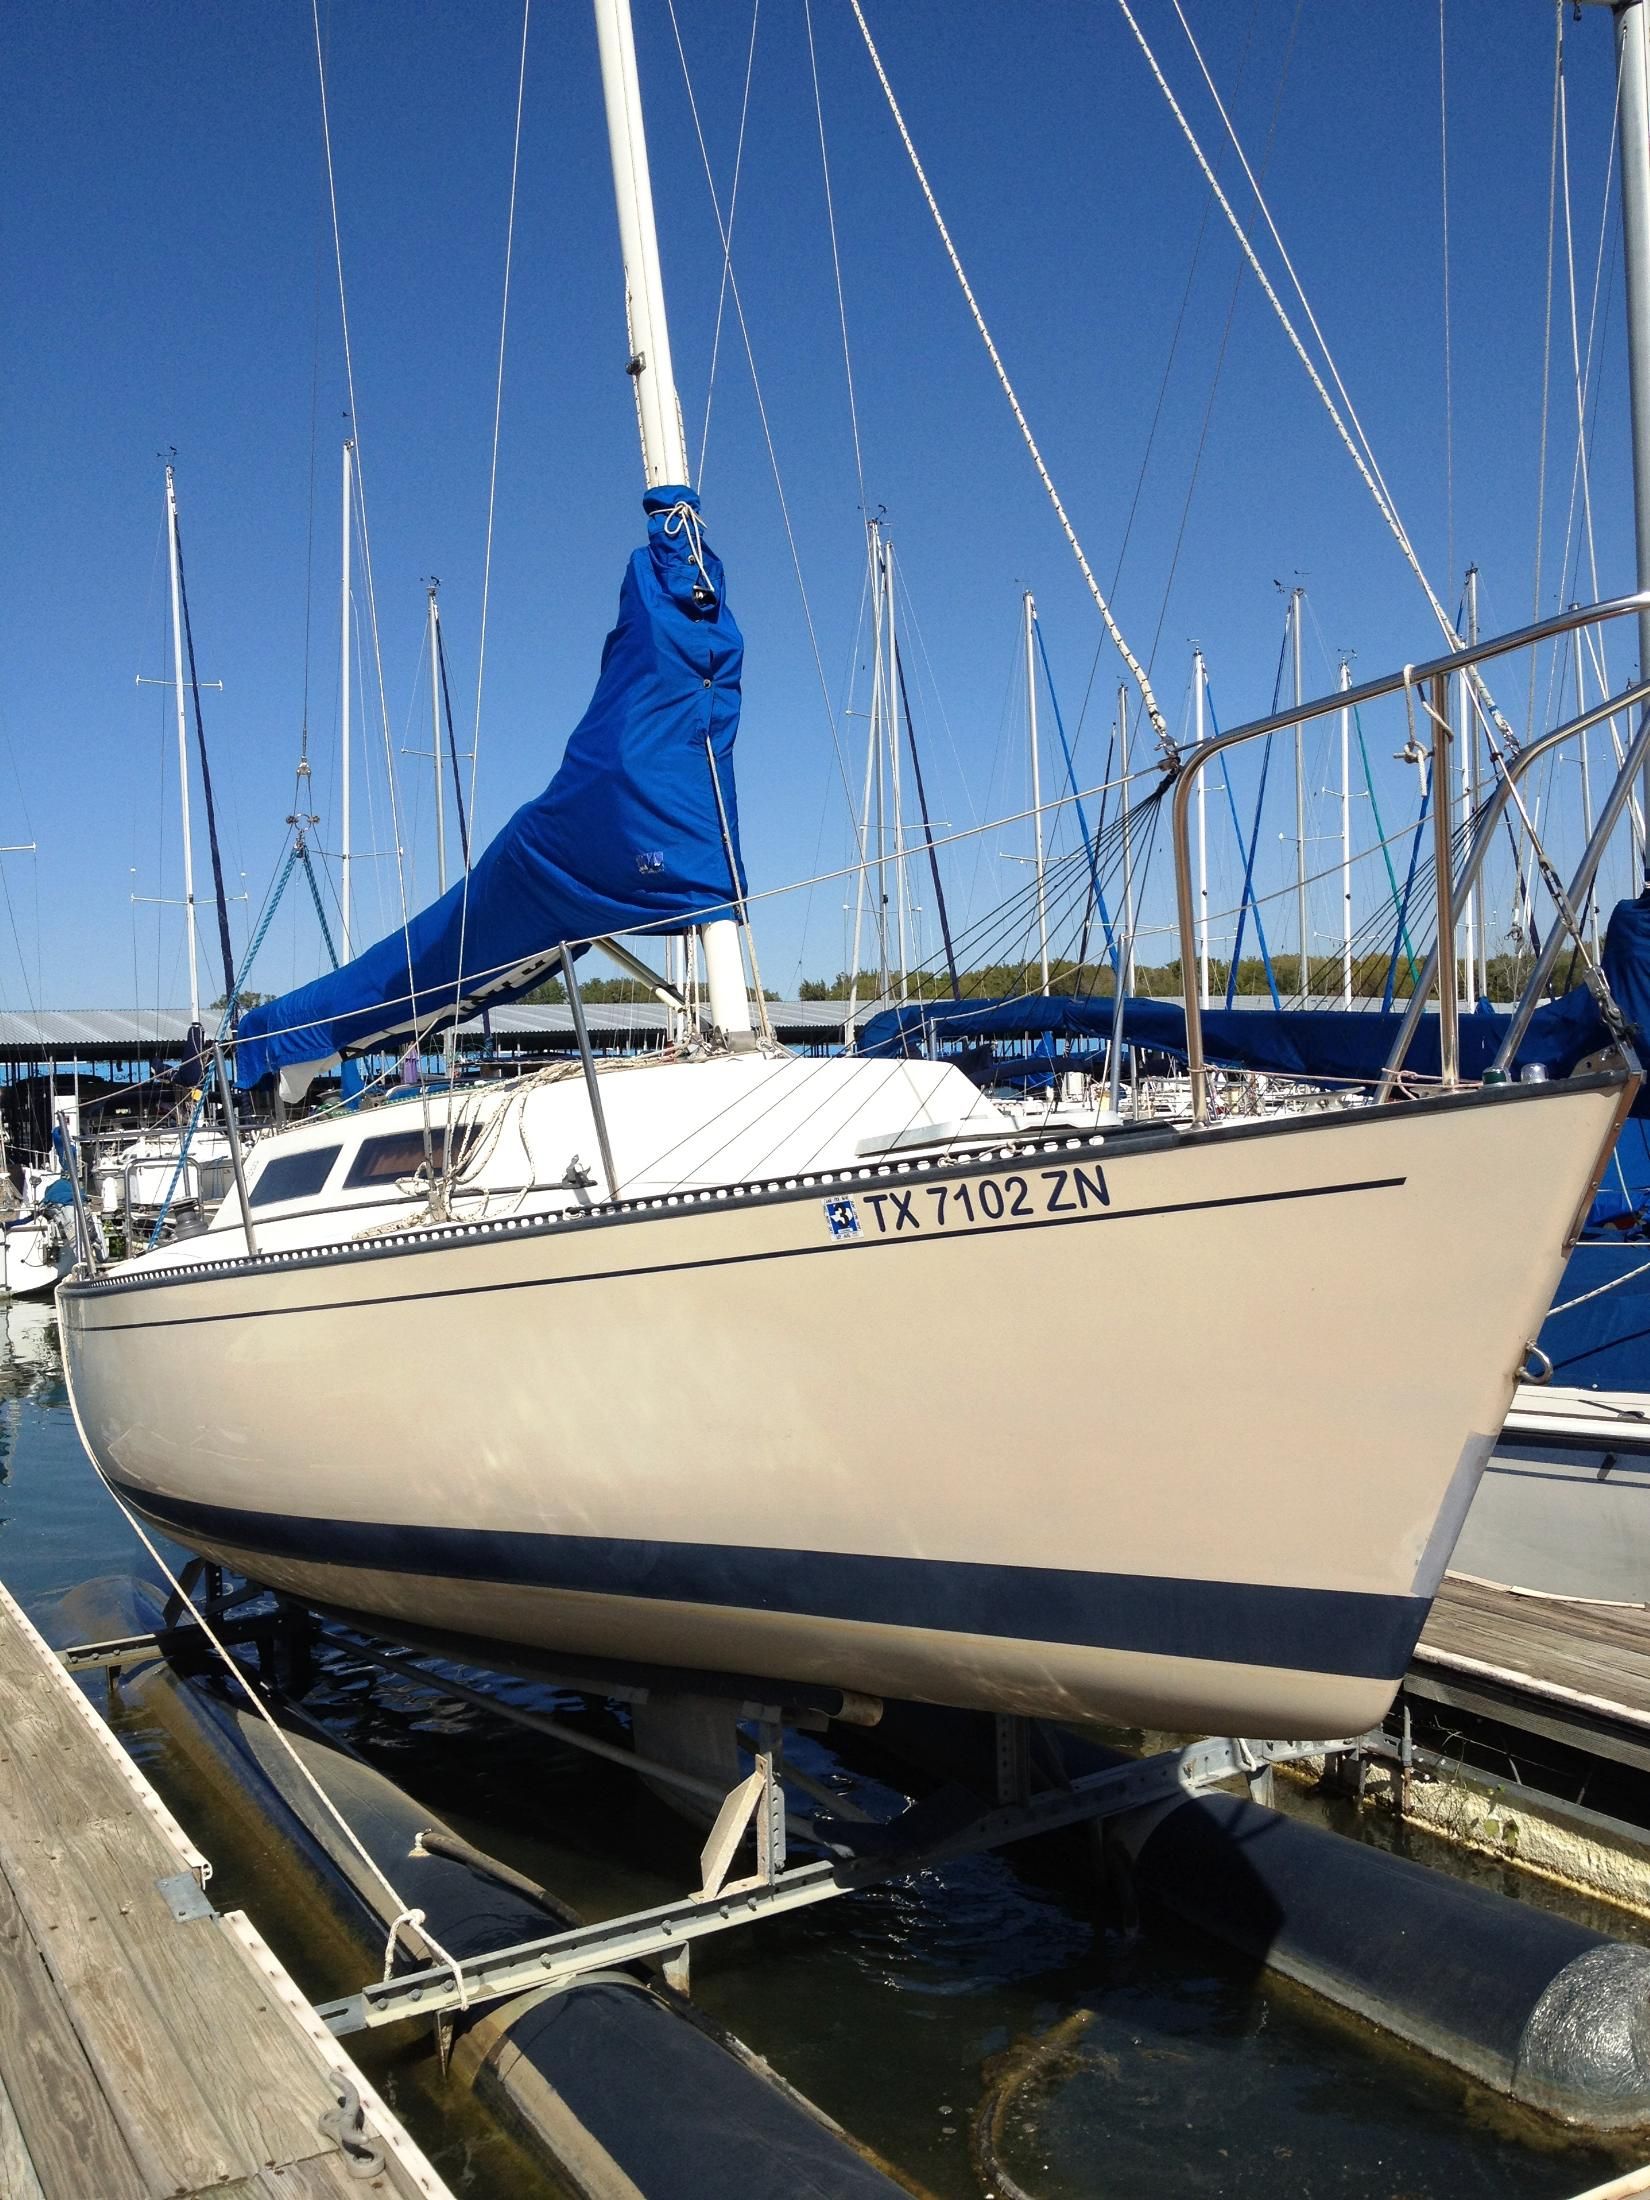 s2 sailboats for sale by owners